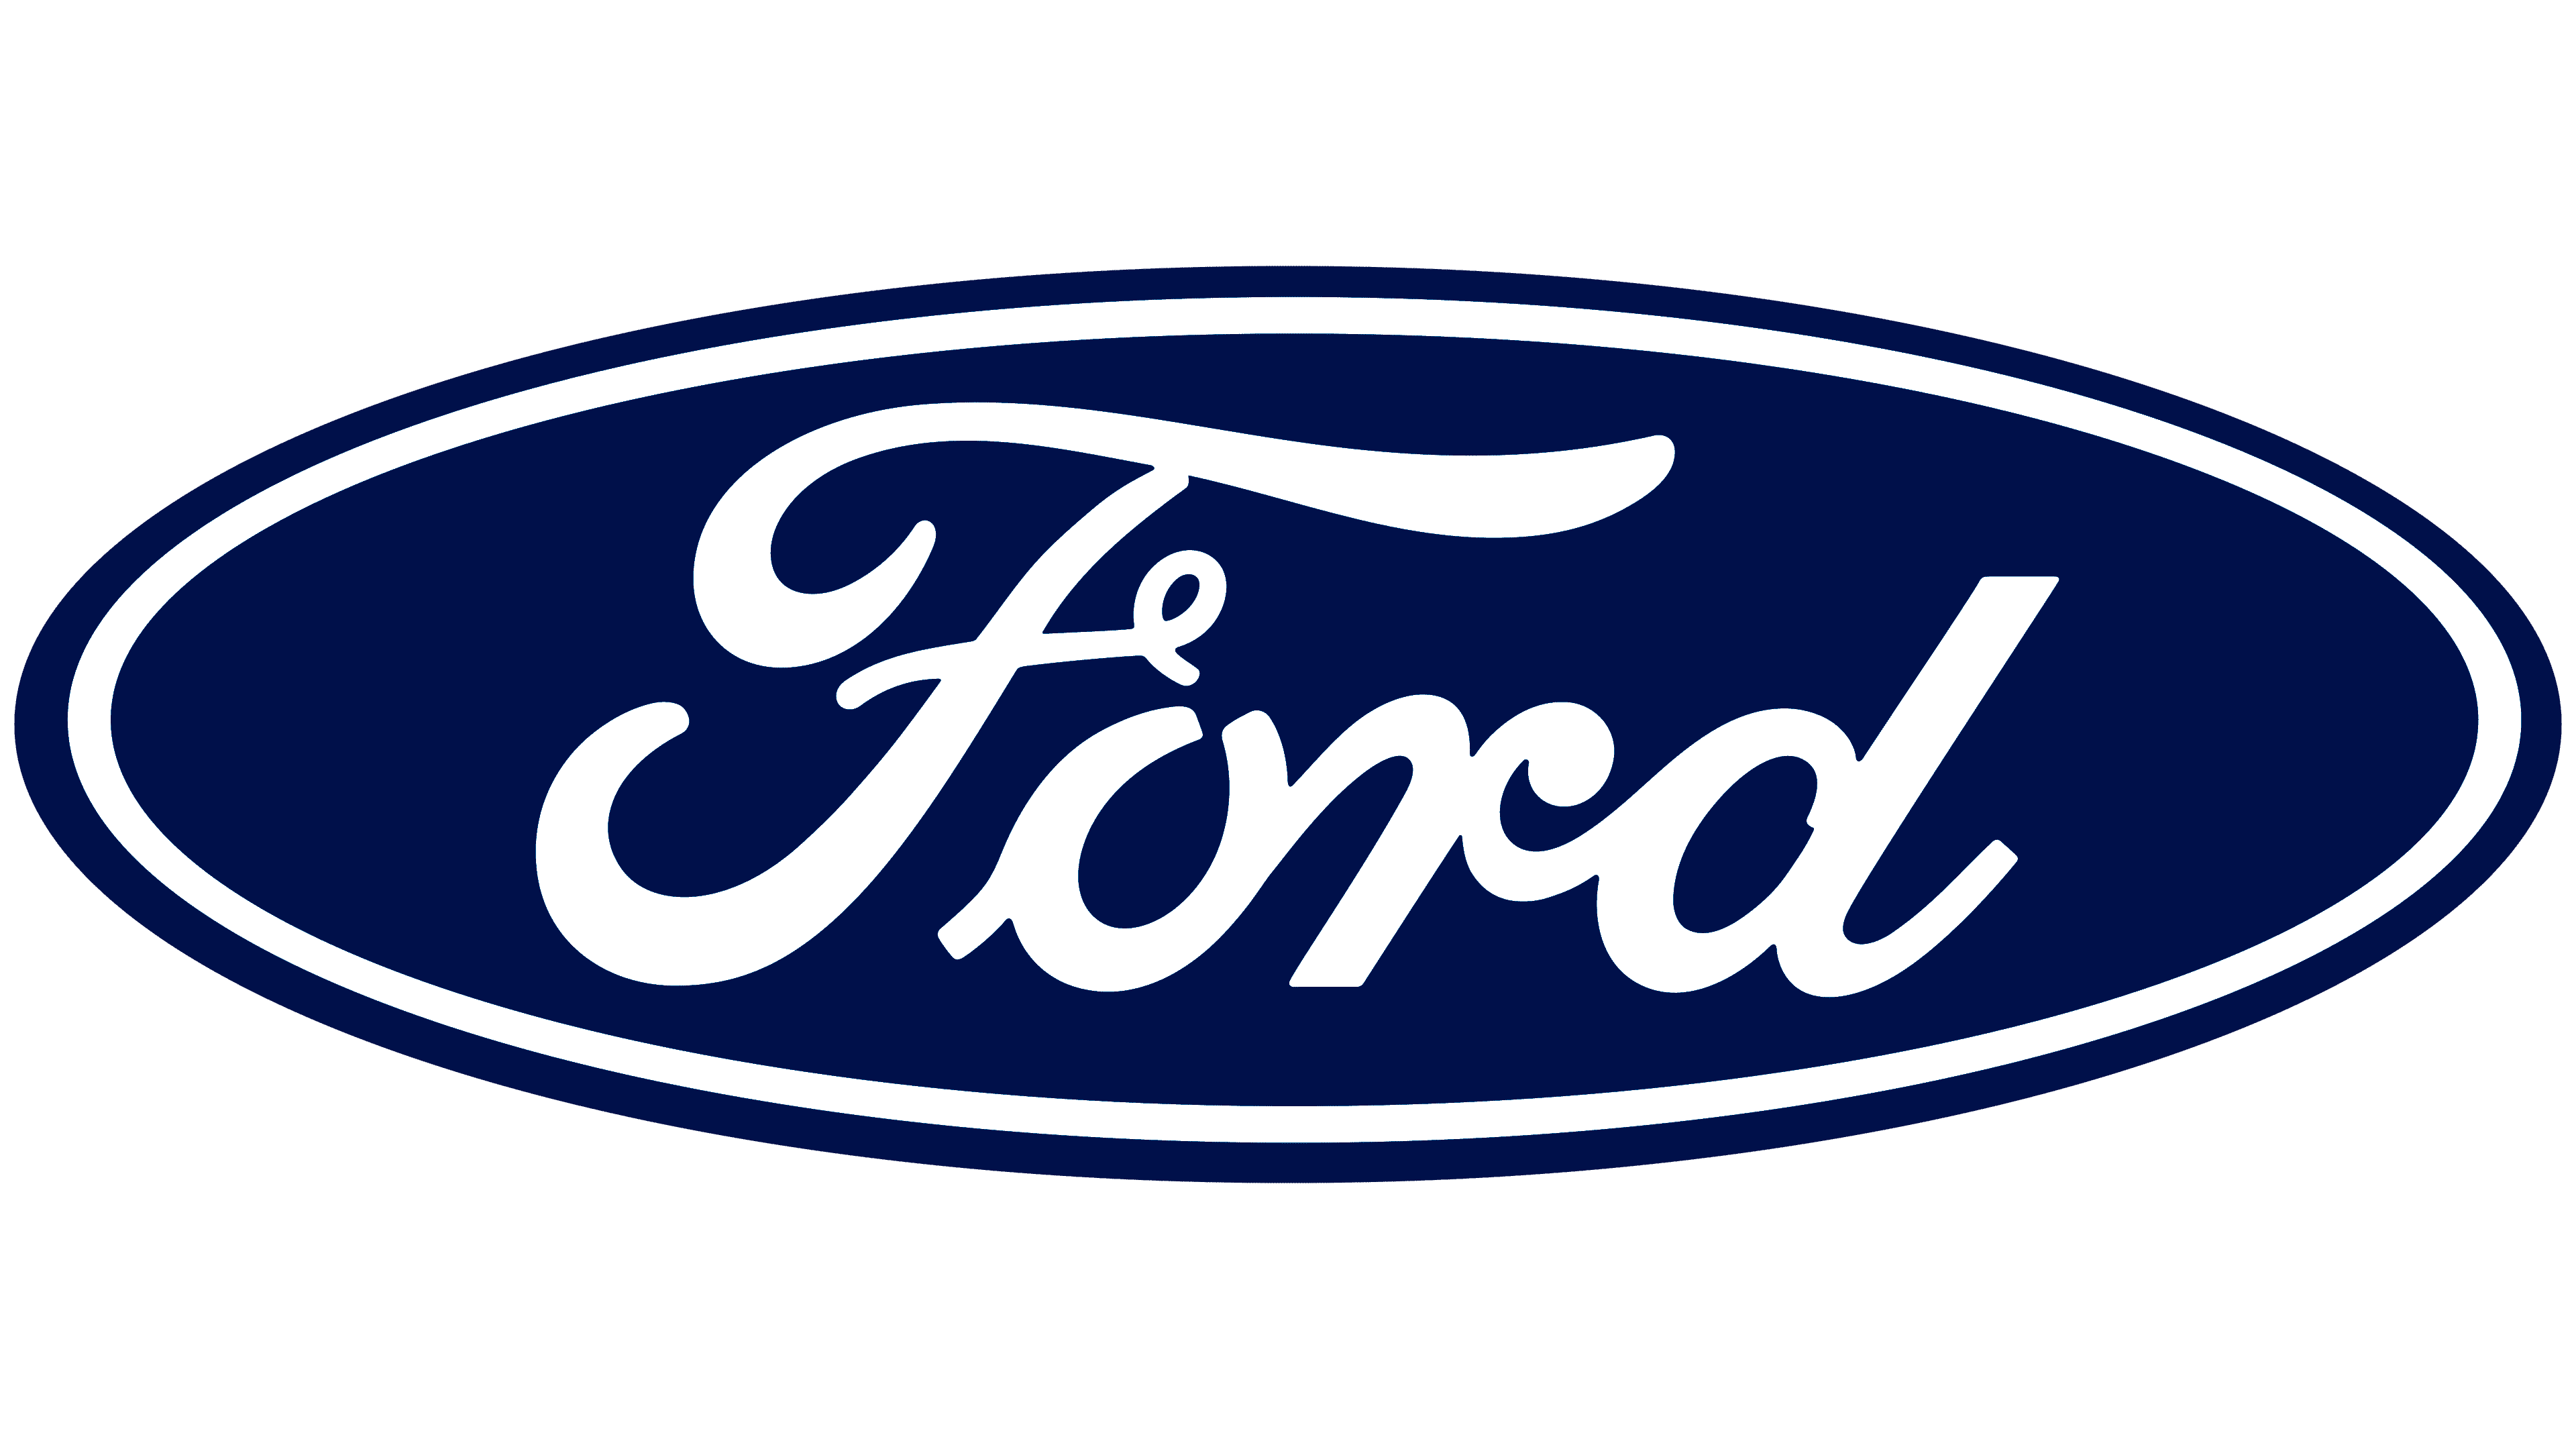 Ford Reprise